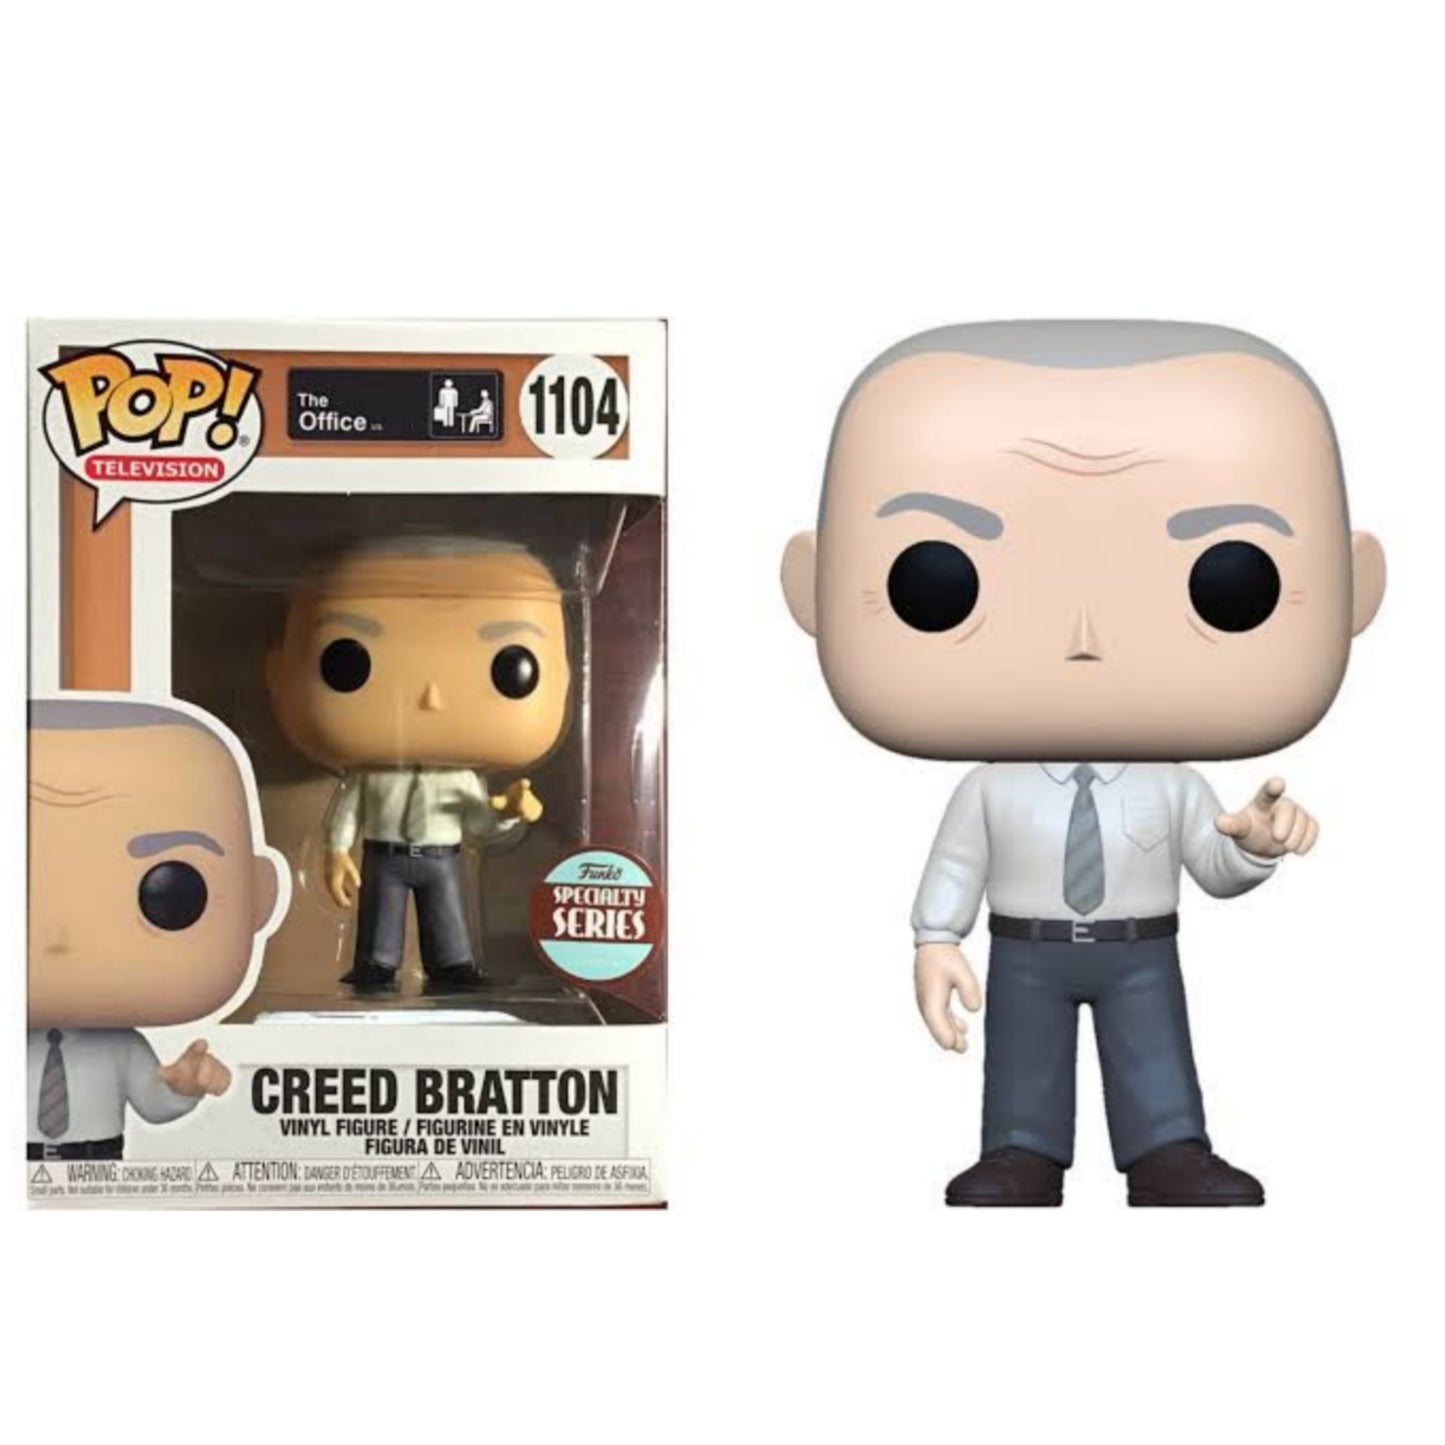 On Hand Creed Bratton Specialty Series Funko Pop!